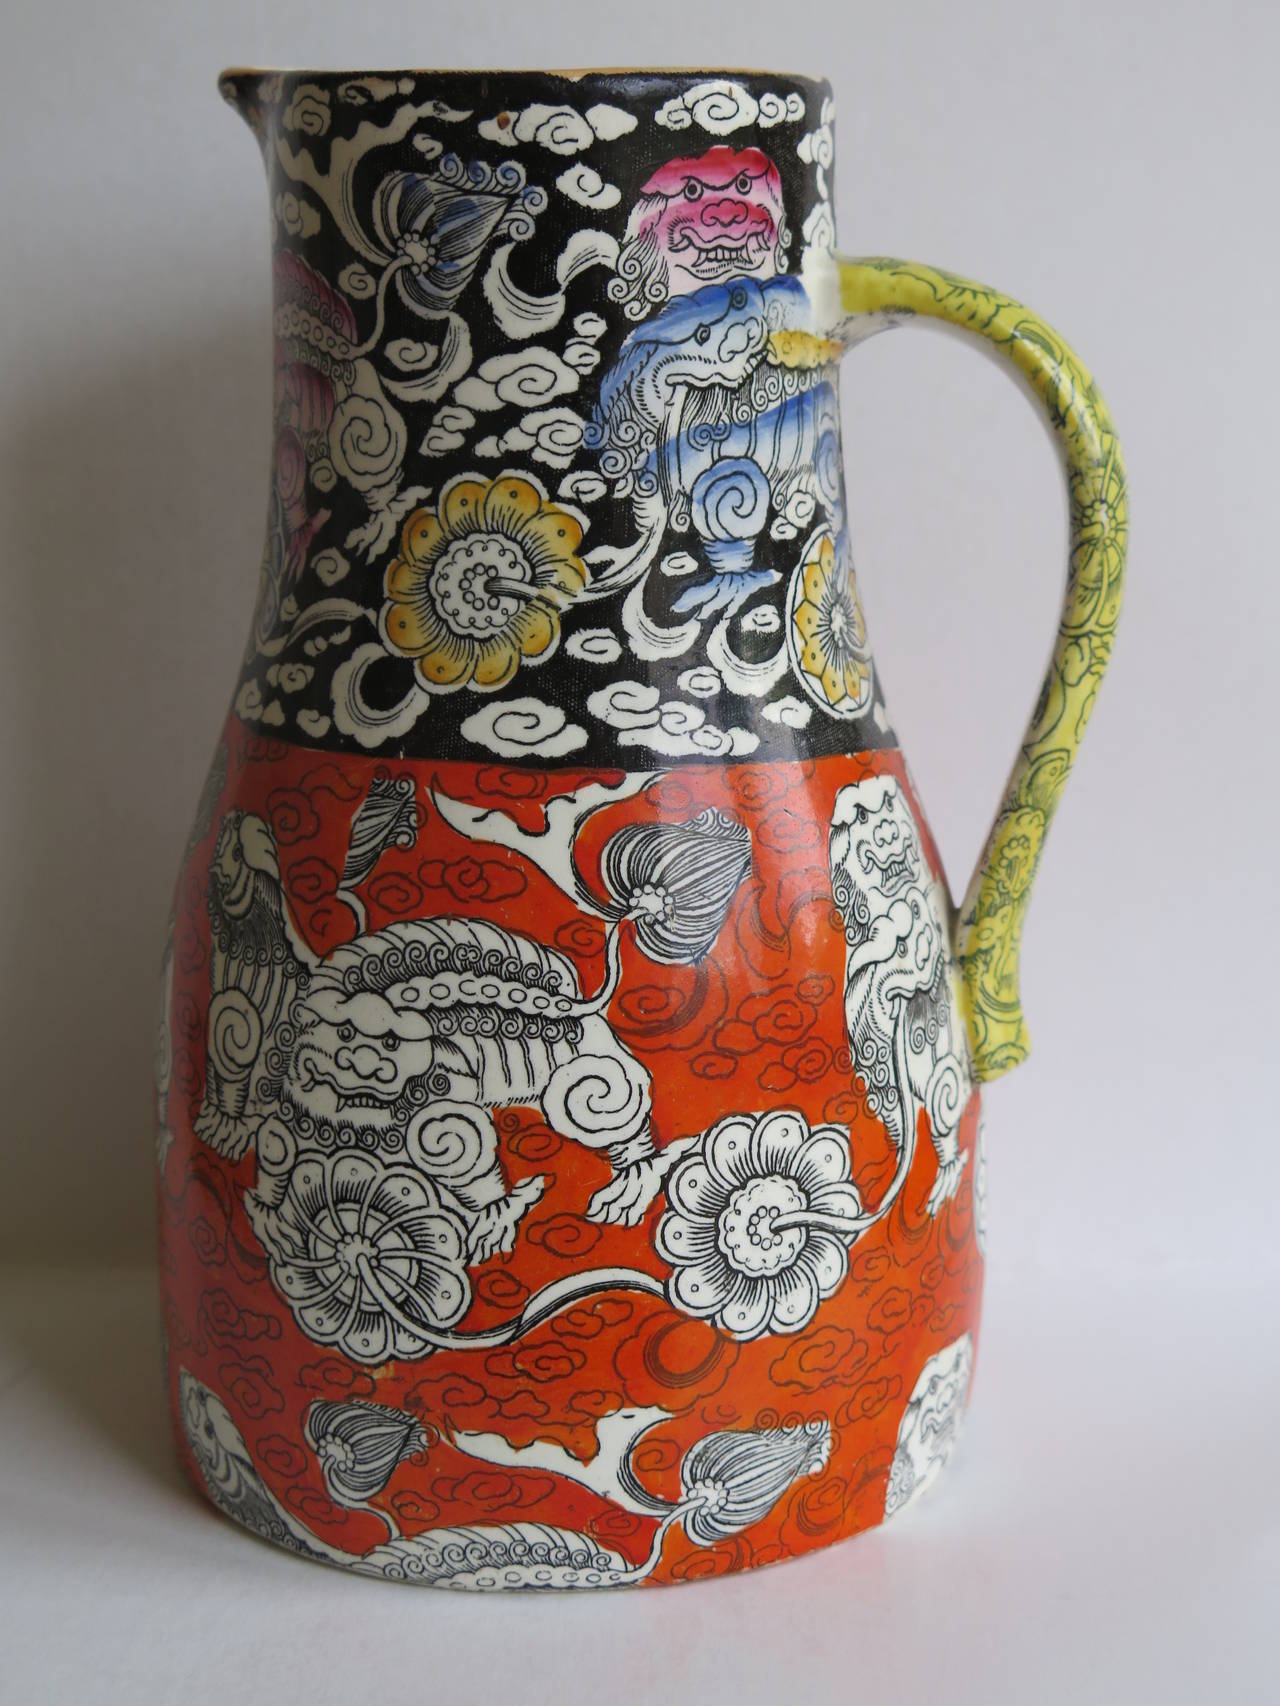 This is a RARE shape Jug by Masons Ironstone pottery 

The Jug is decorated with the chinoiserie influenced 